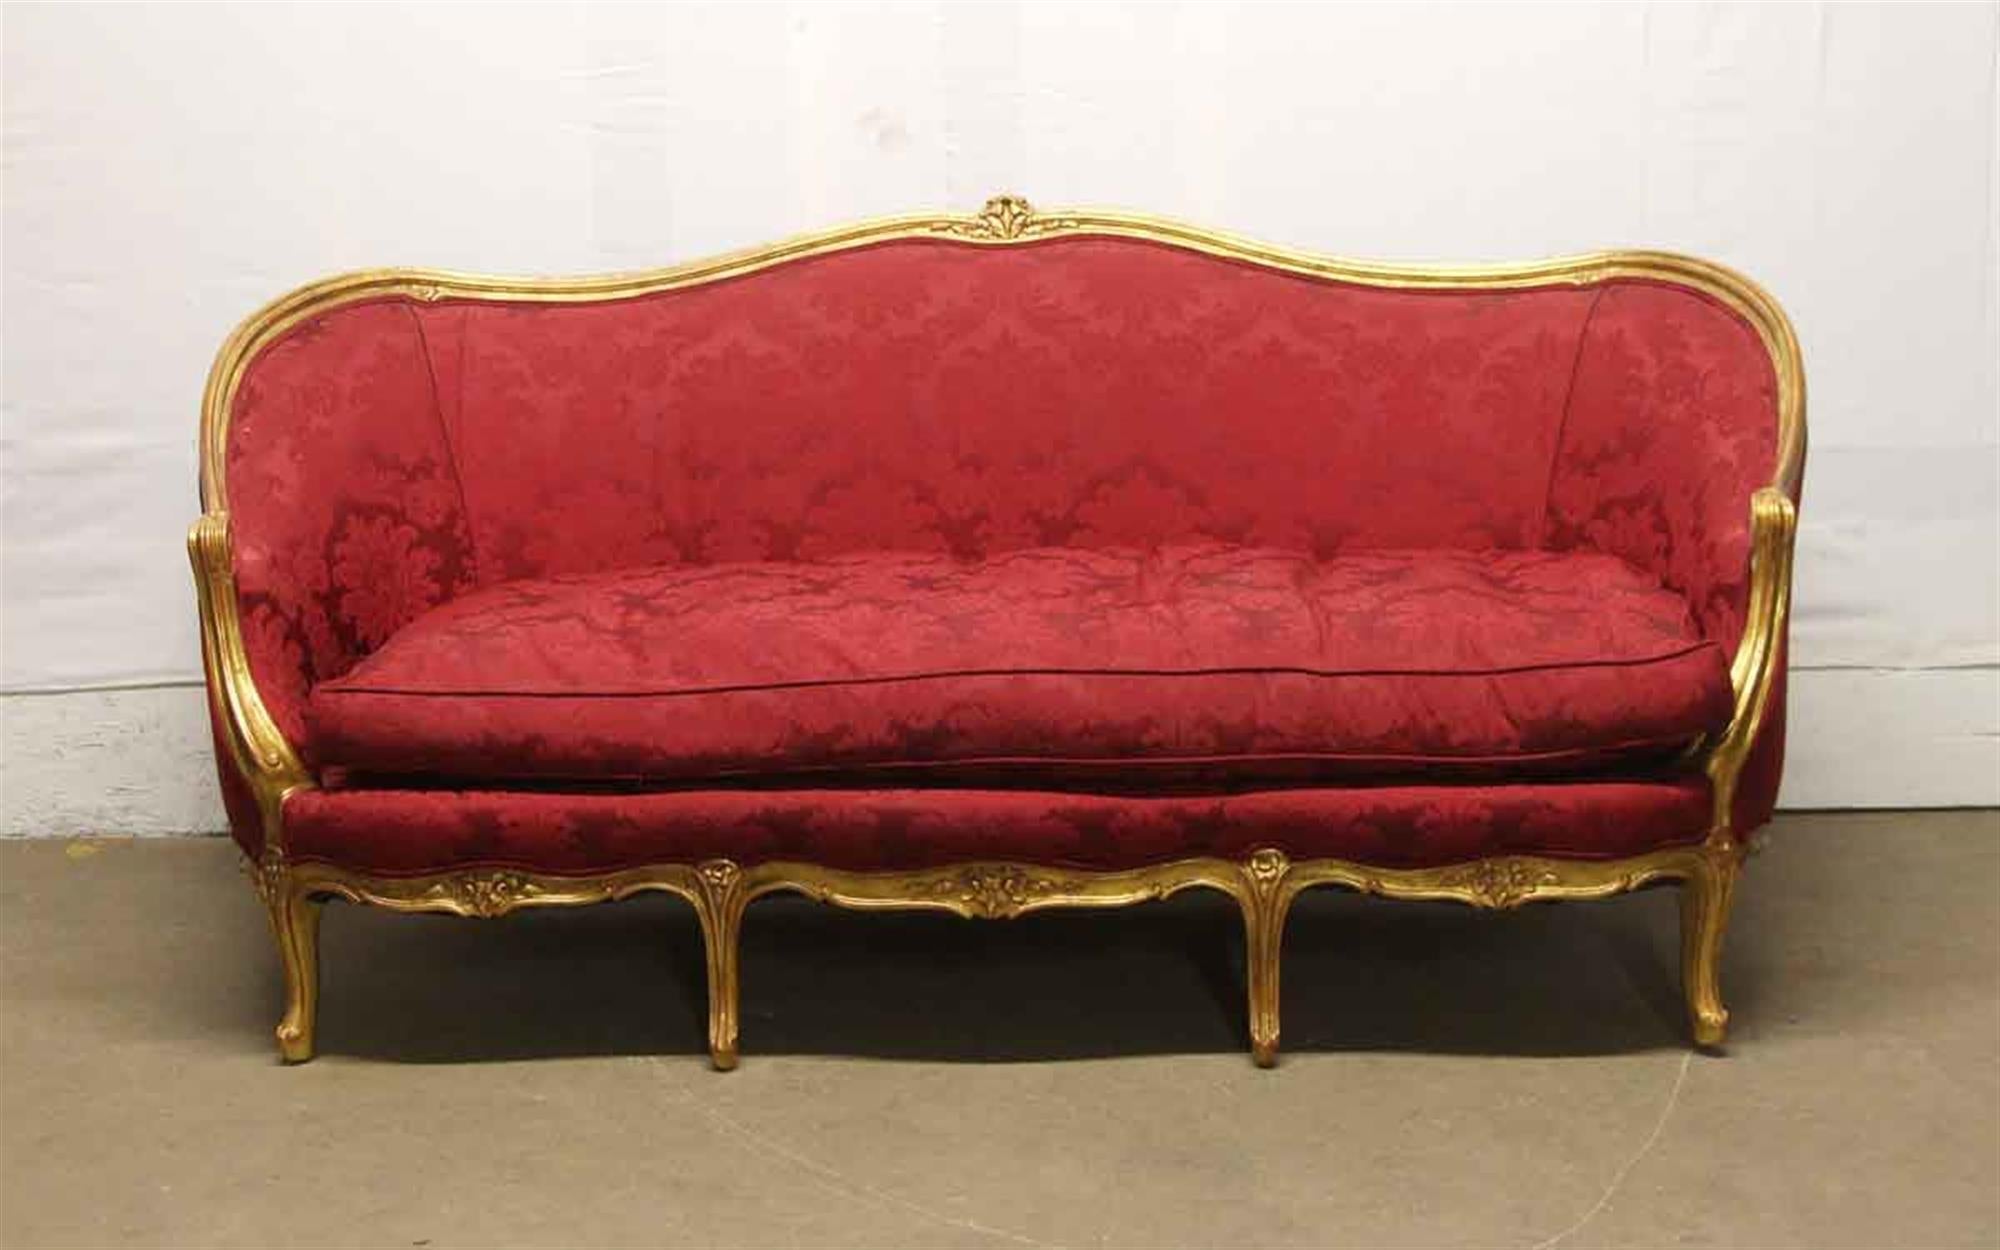 1890s sofa or couch with a gilded carved wood frame and red reupholstered floral cushions. This can be seen at our 400 Gilligan St location in Scranton, PA.